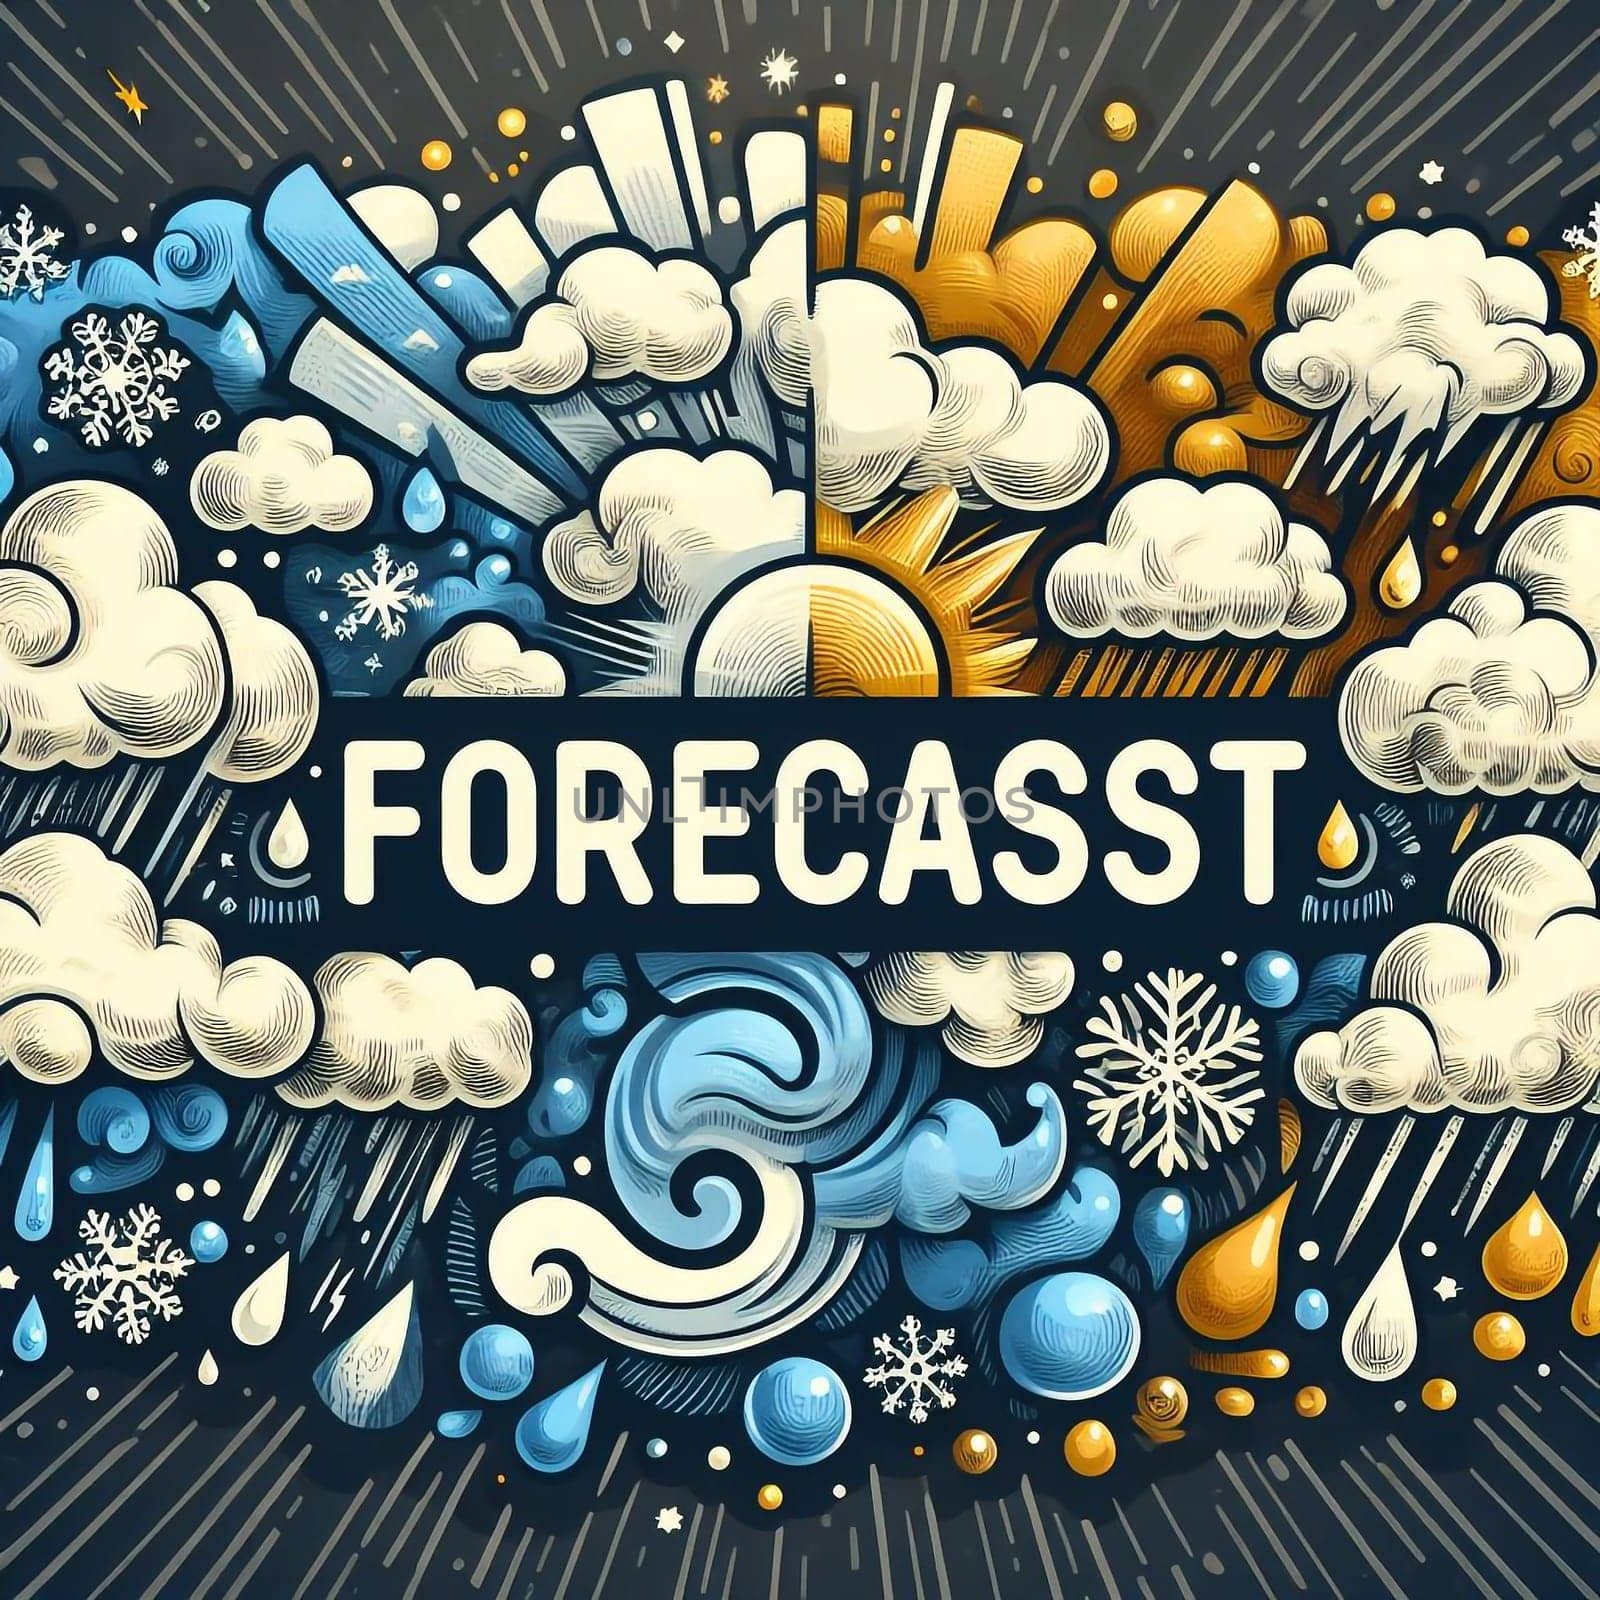 Forecasts banner for predicting future events by architectphd